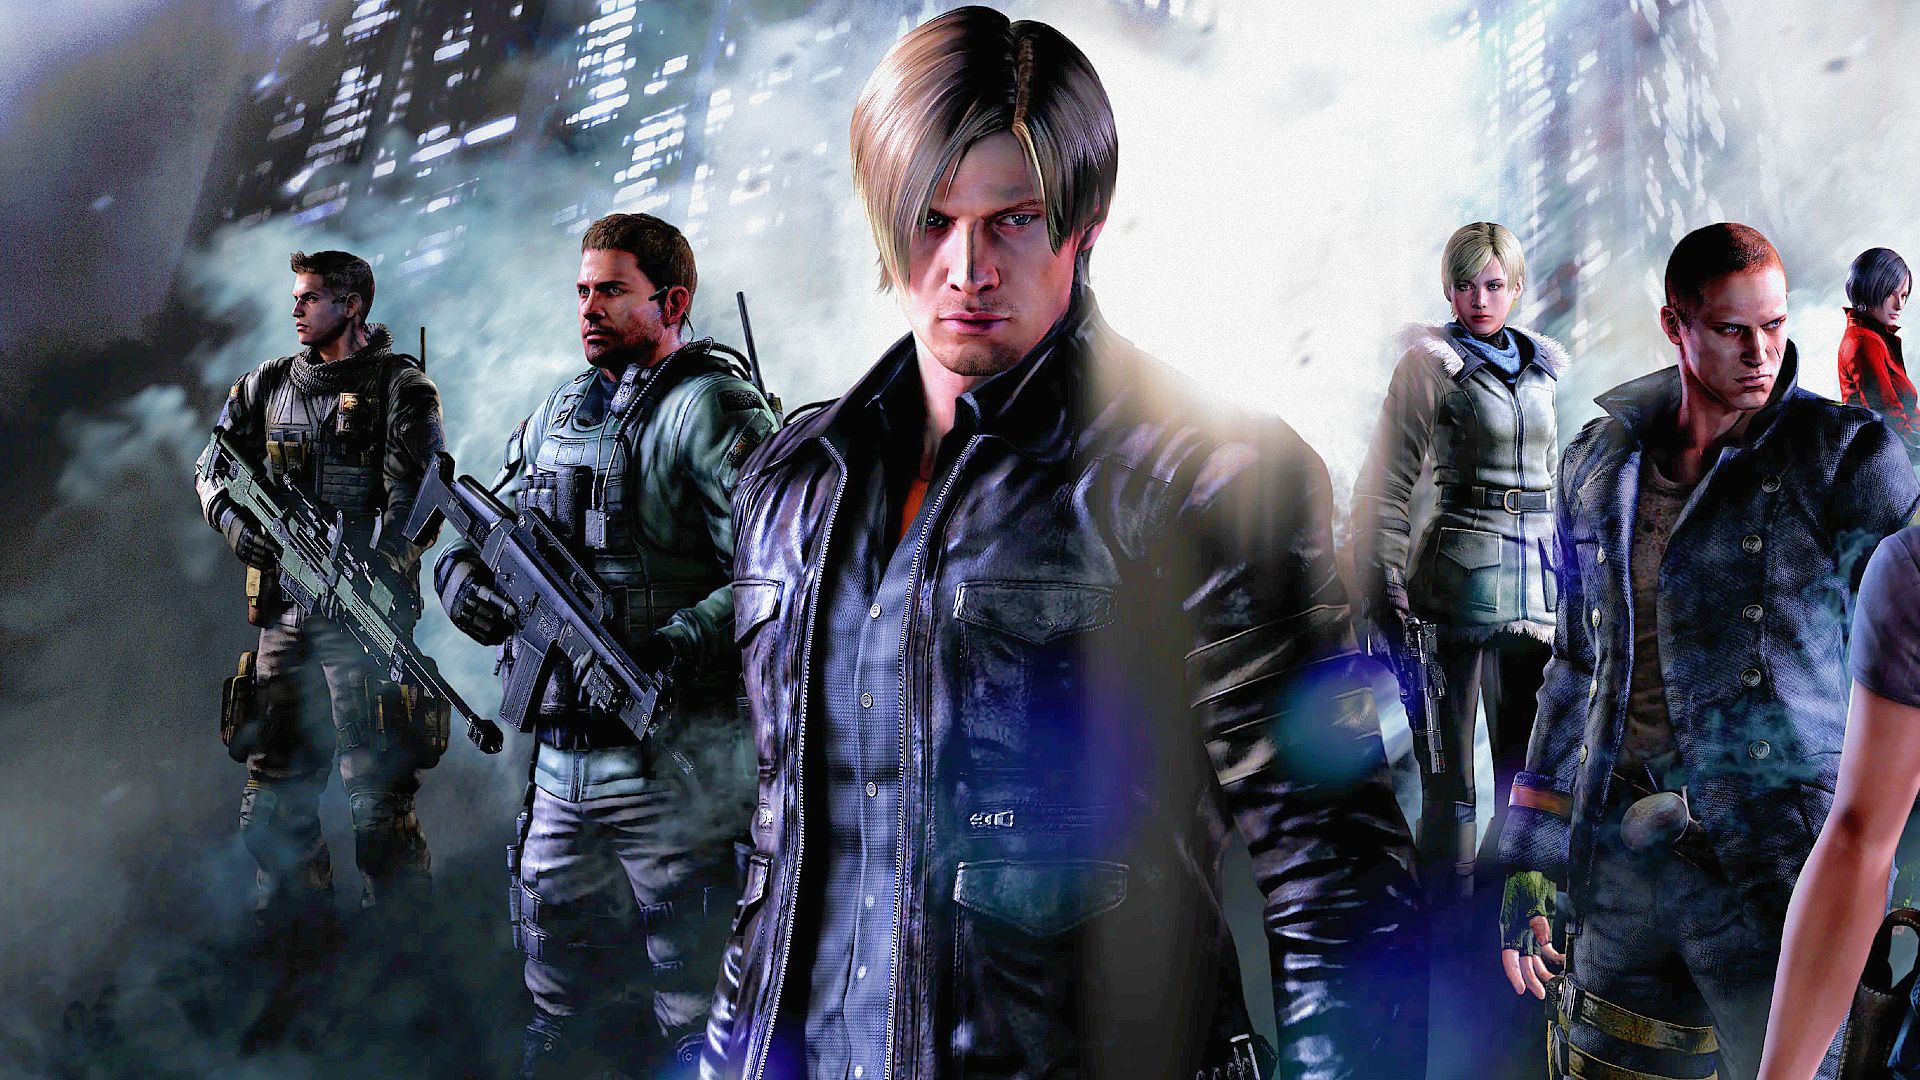 Silent Hill and Resident Evil are Becoming More Similar with Time